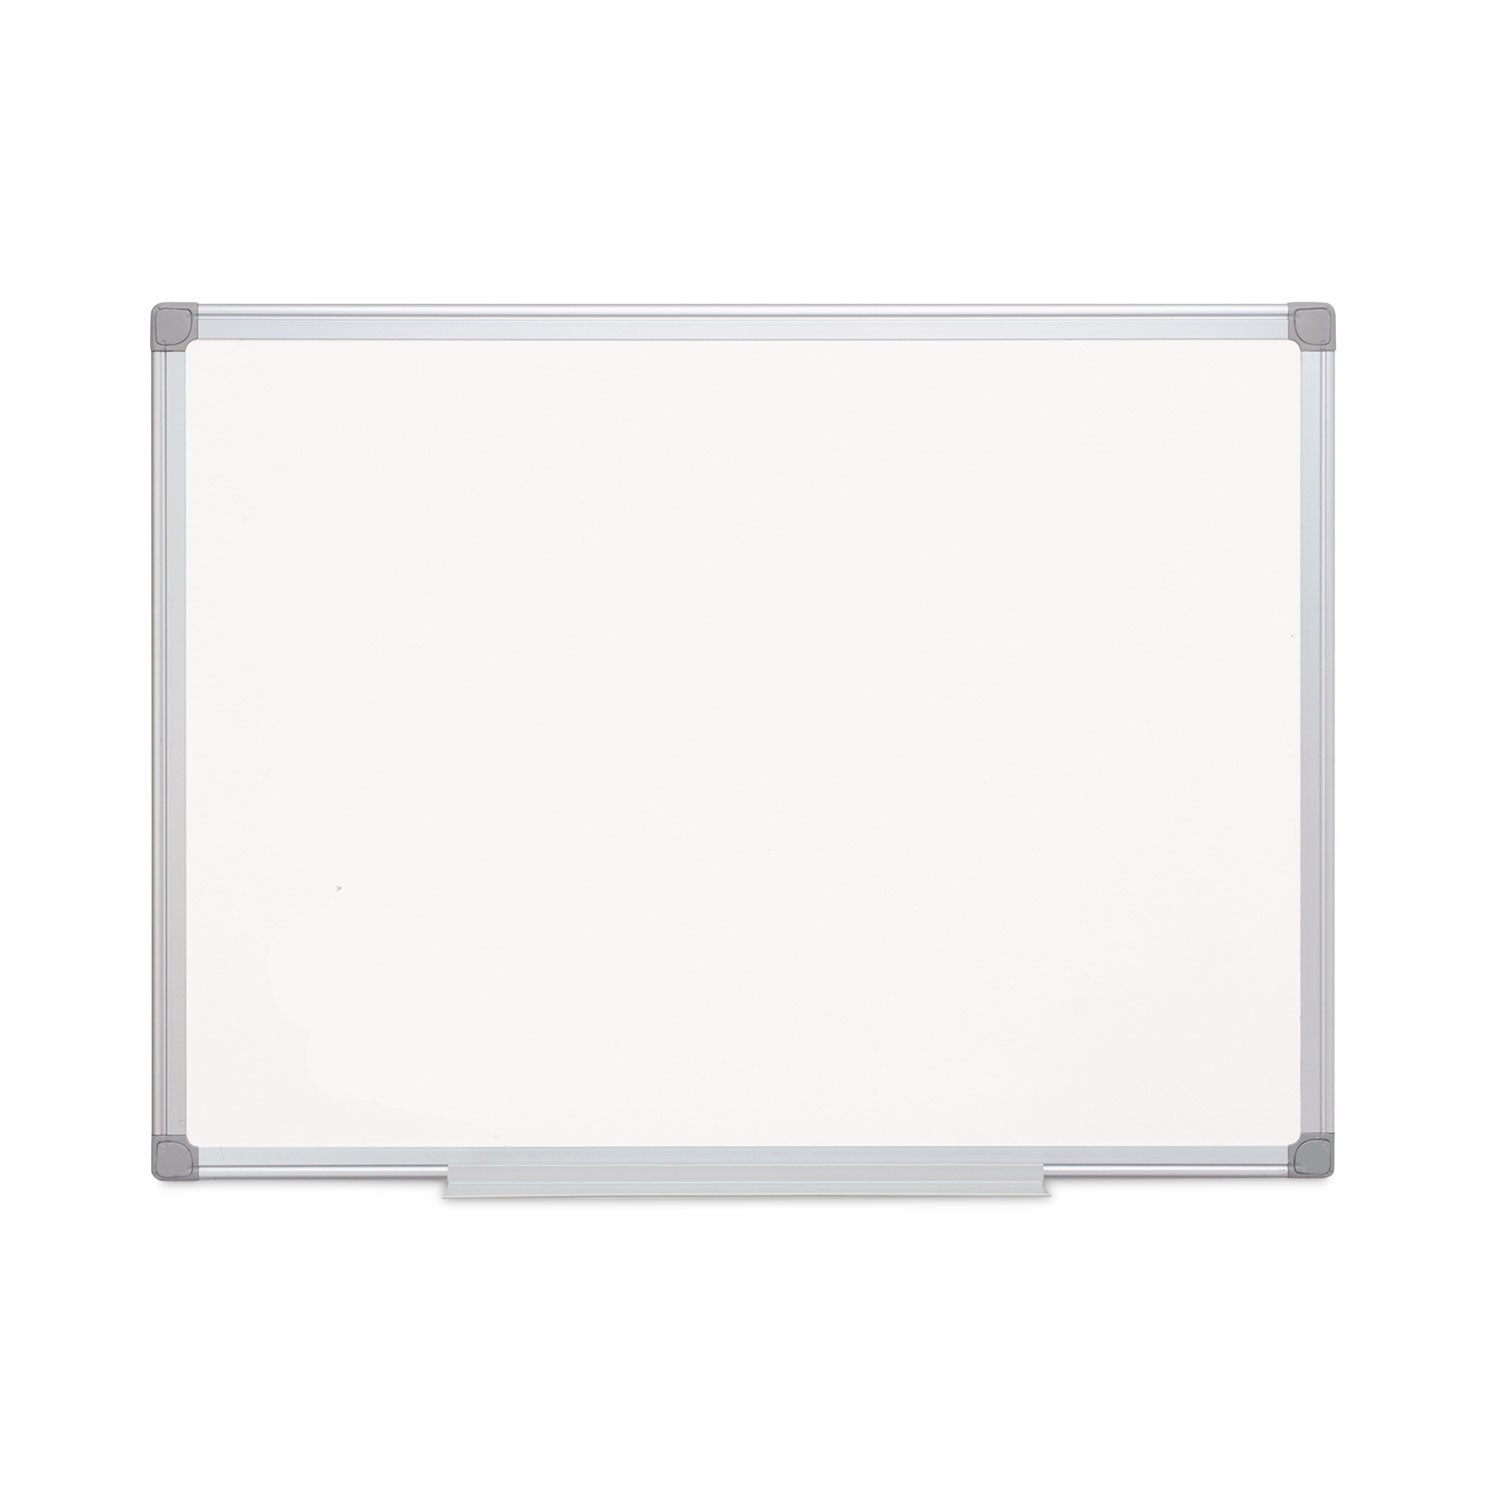 Earth Silver Easy-Clean Dry Erase Board, Reversible, 36 x 24, White Surface, Silver Aluminum Frame - 